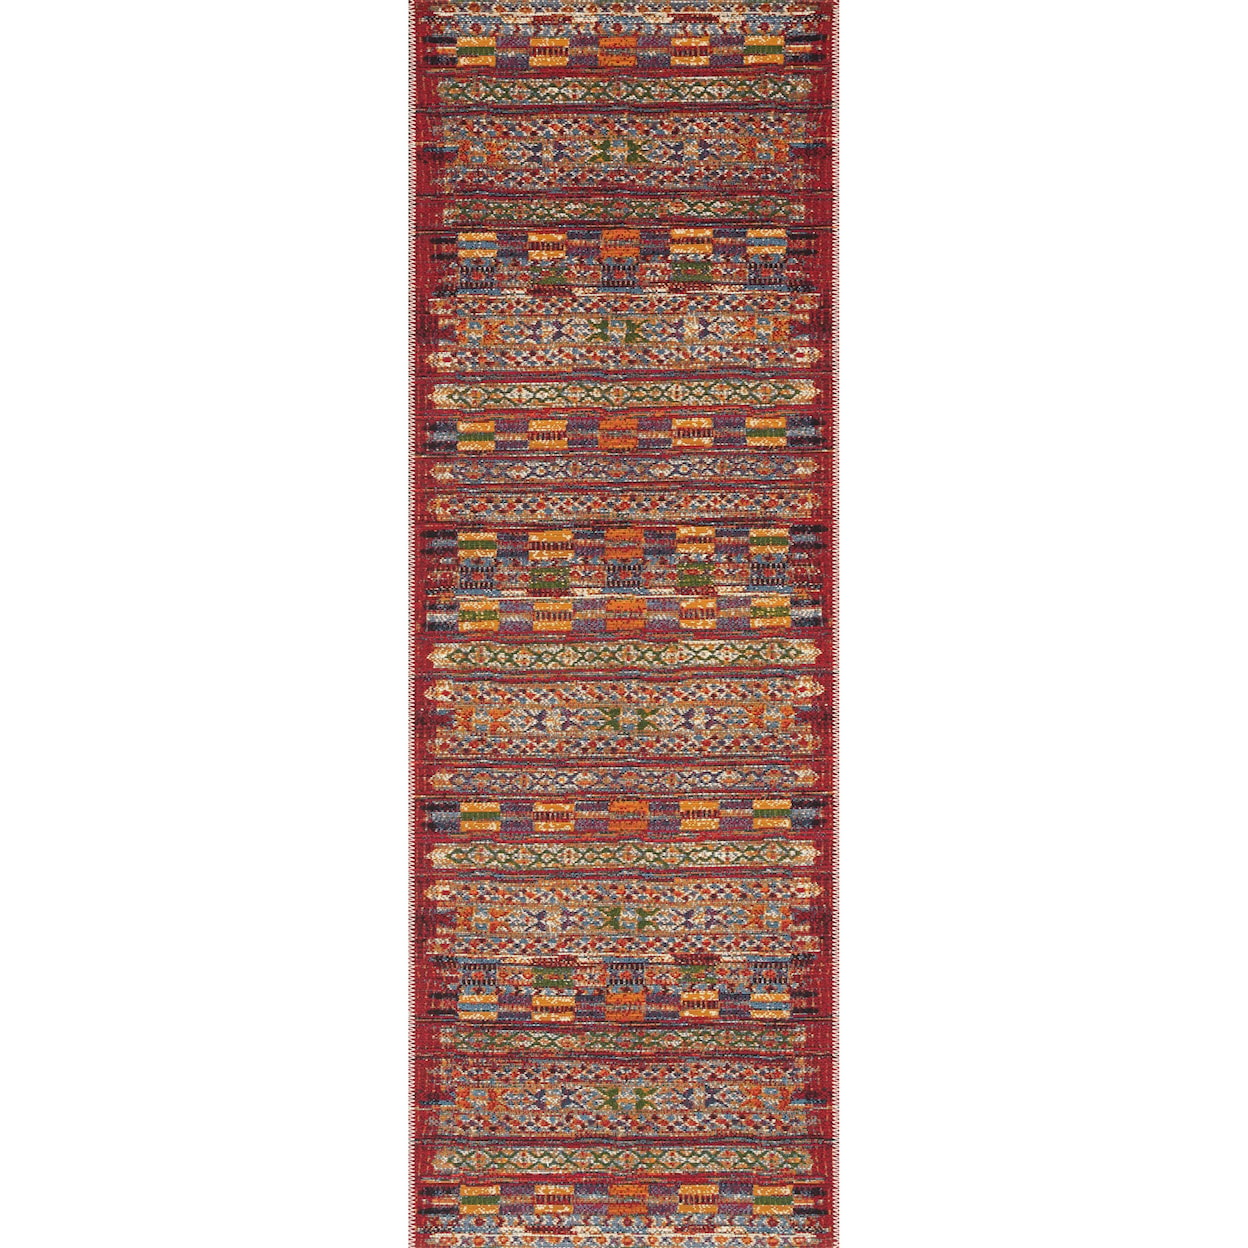 Reeds Rugs Mika 2'5" x 7'8" Red / Multi Rug